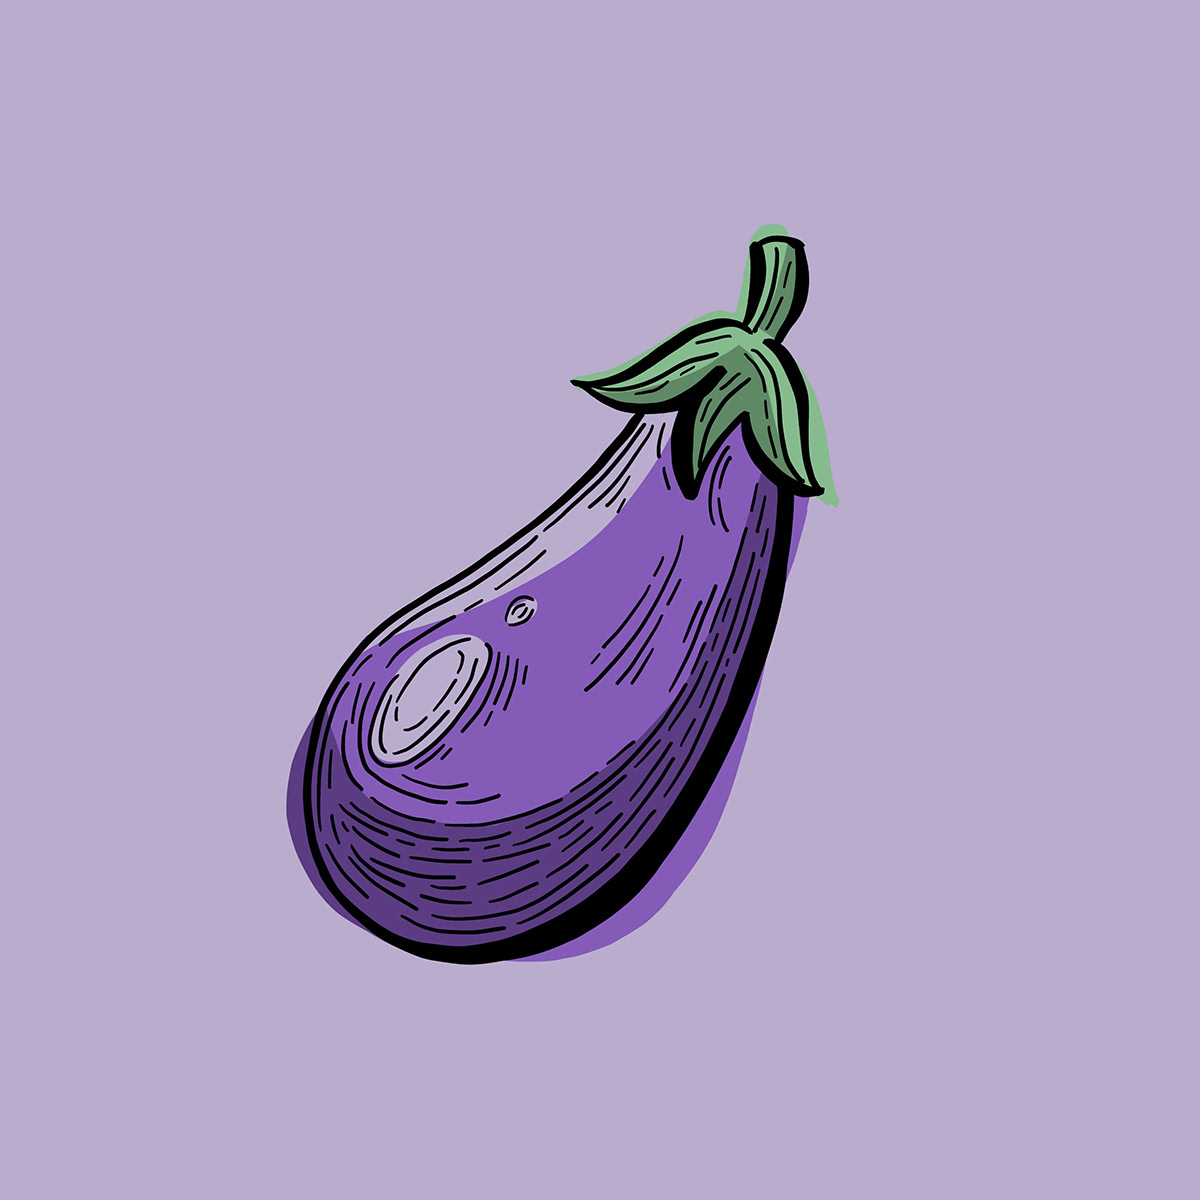 Illustration of a large eggplant drawn in a wood cut style.